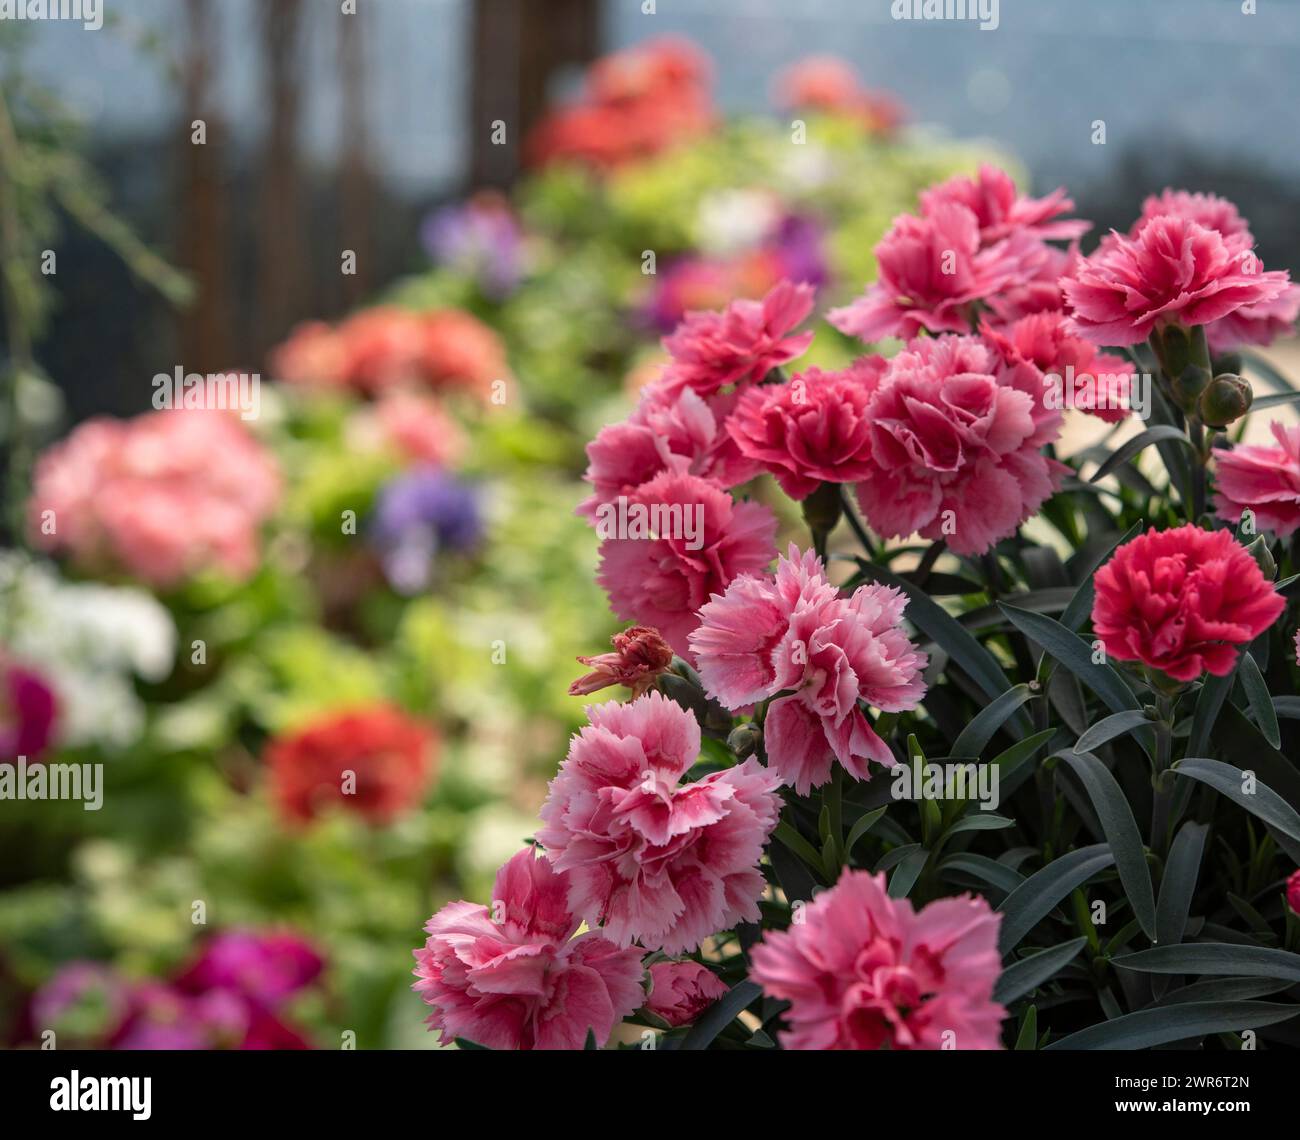 Dianthus gratianopolitanus, commonly known as the Cheddar pink or clove pink Stock Photo